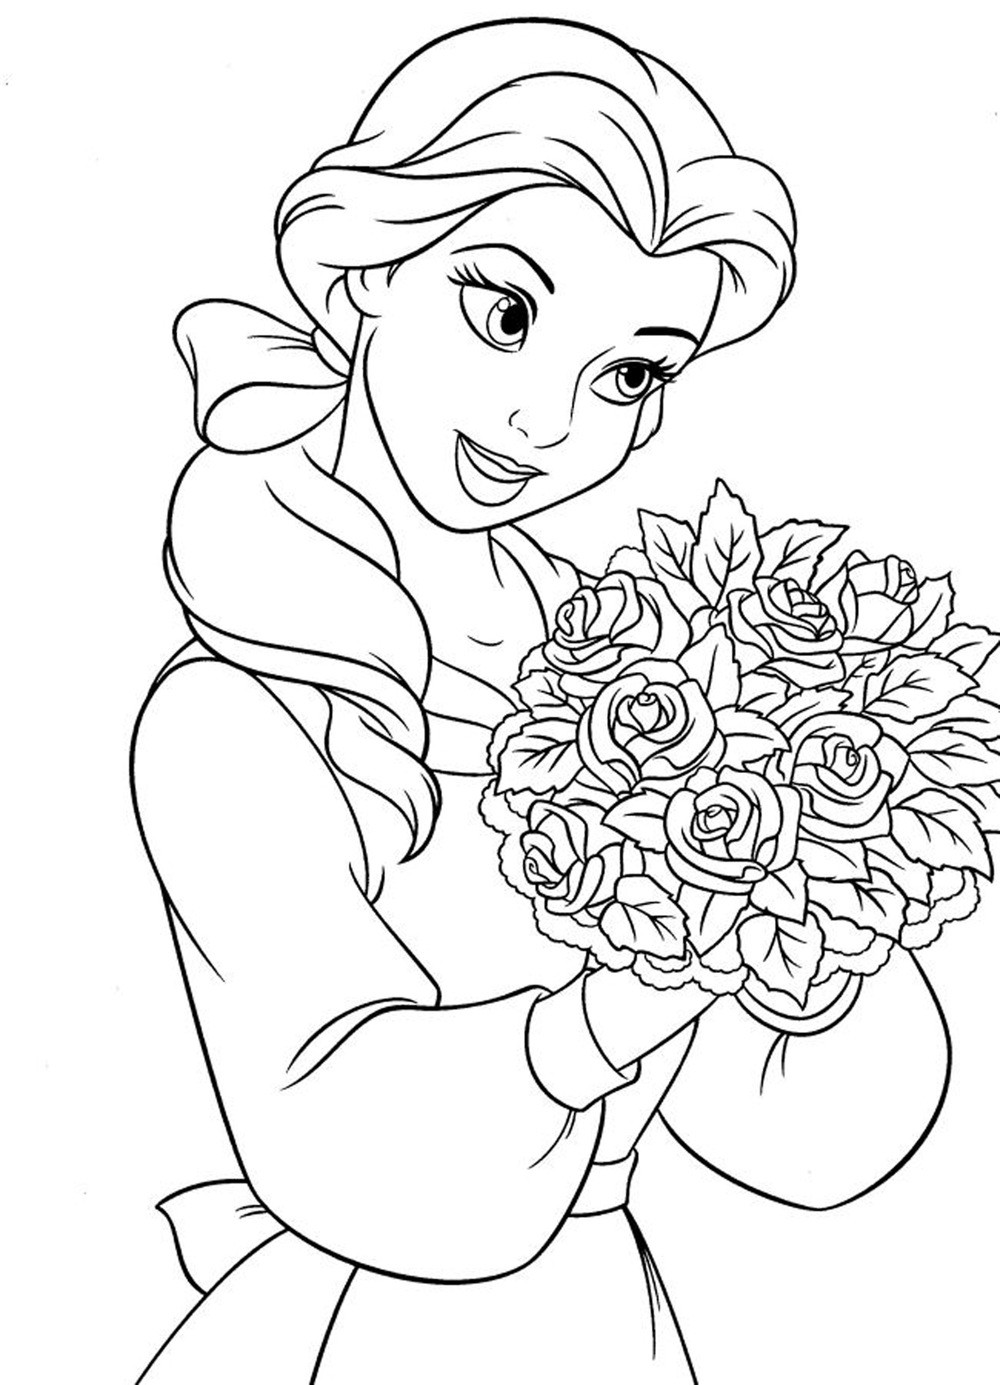 Coloring Pages For Girls Online
 coloring pages for girls